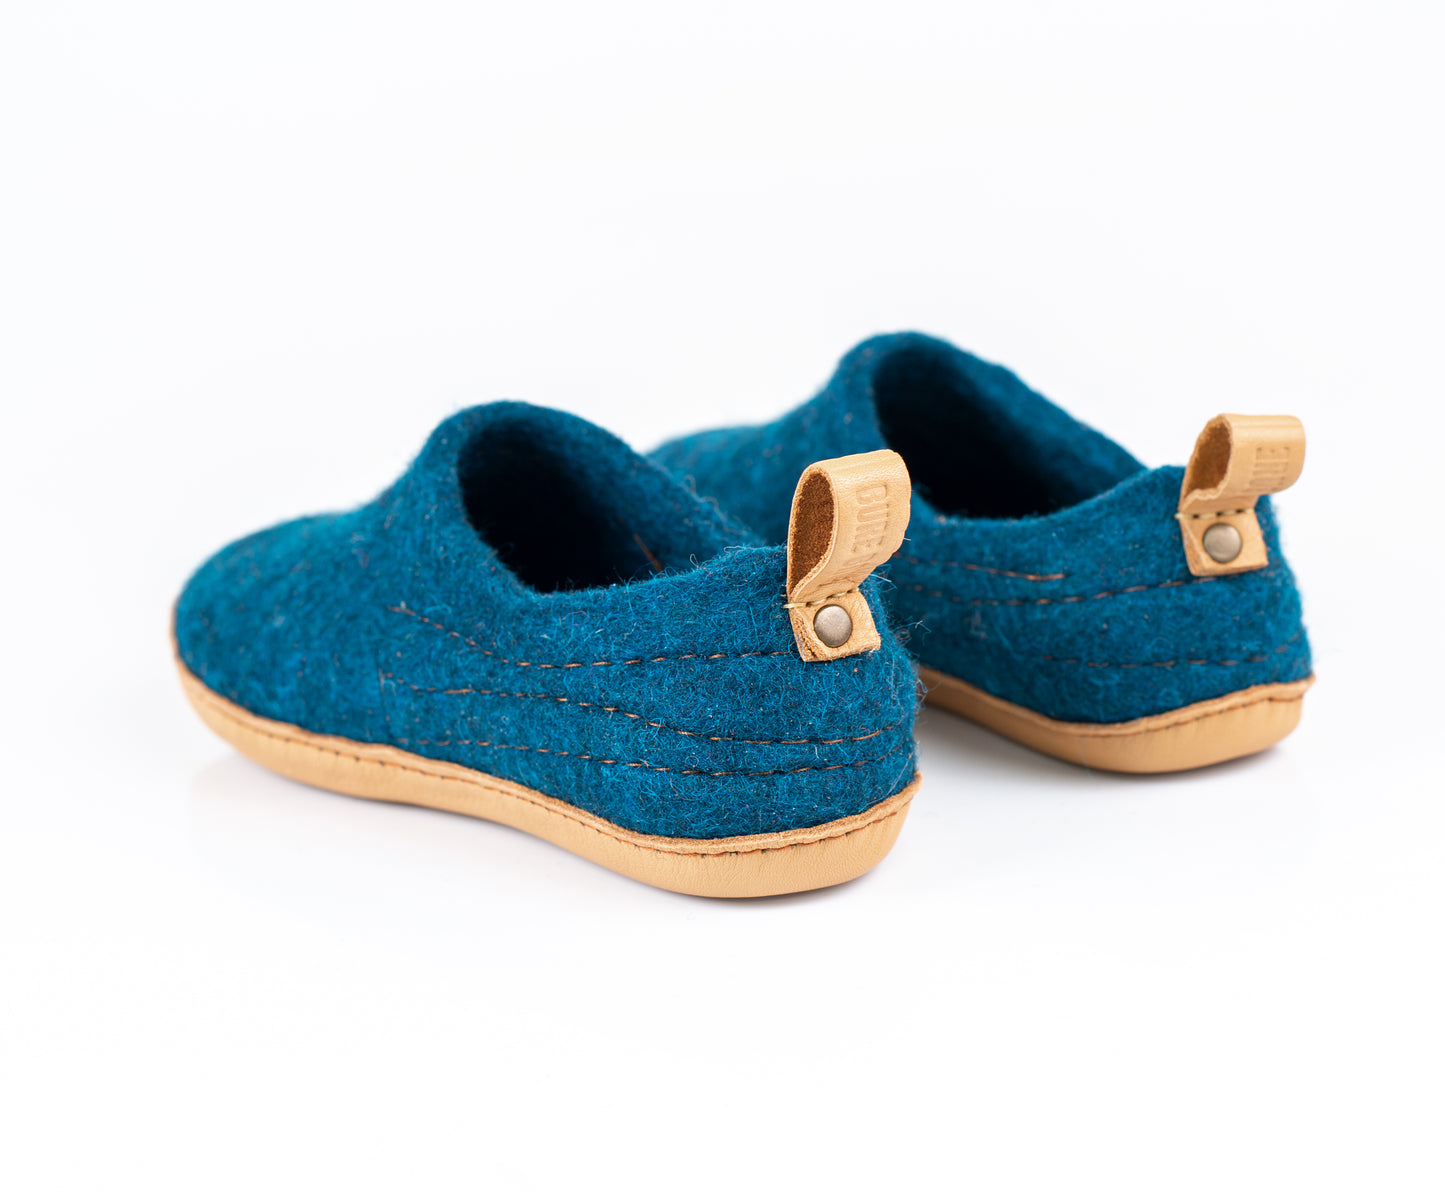 Petrol dark COCOON felted wool slippers with pull loop from recycled leather